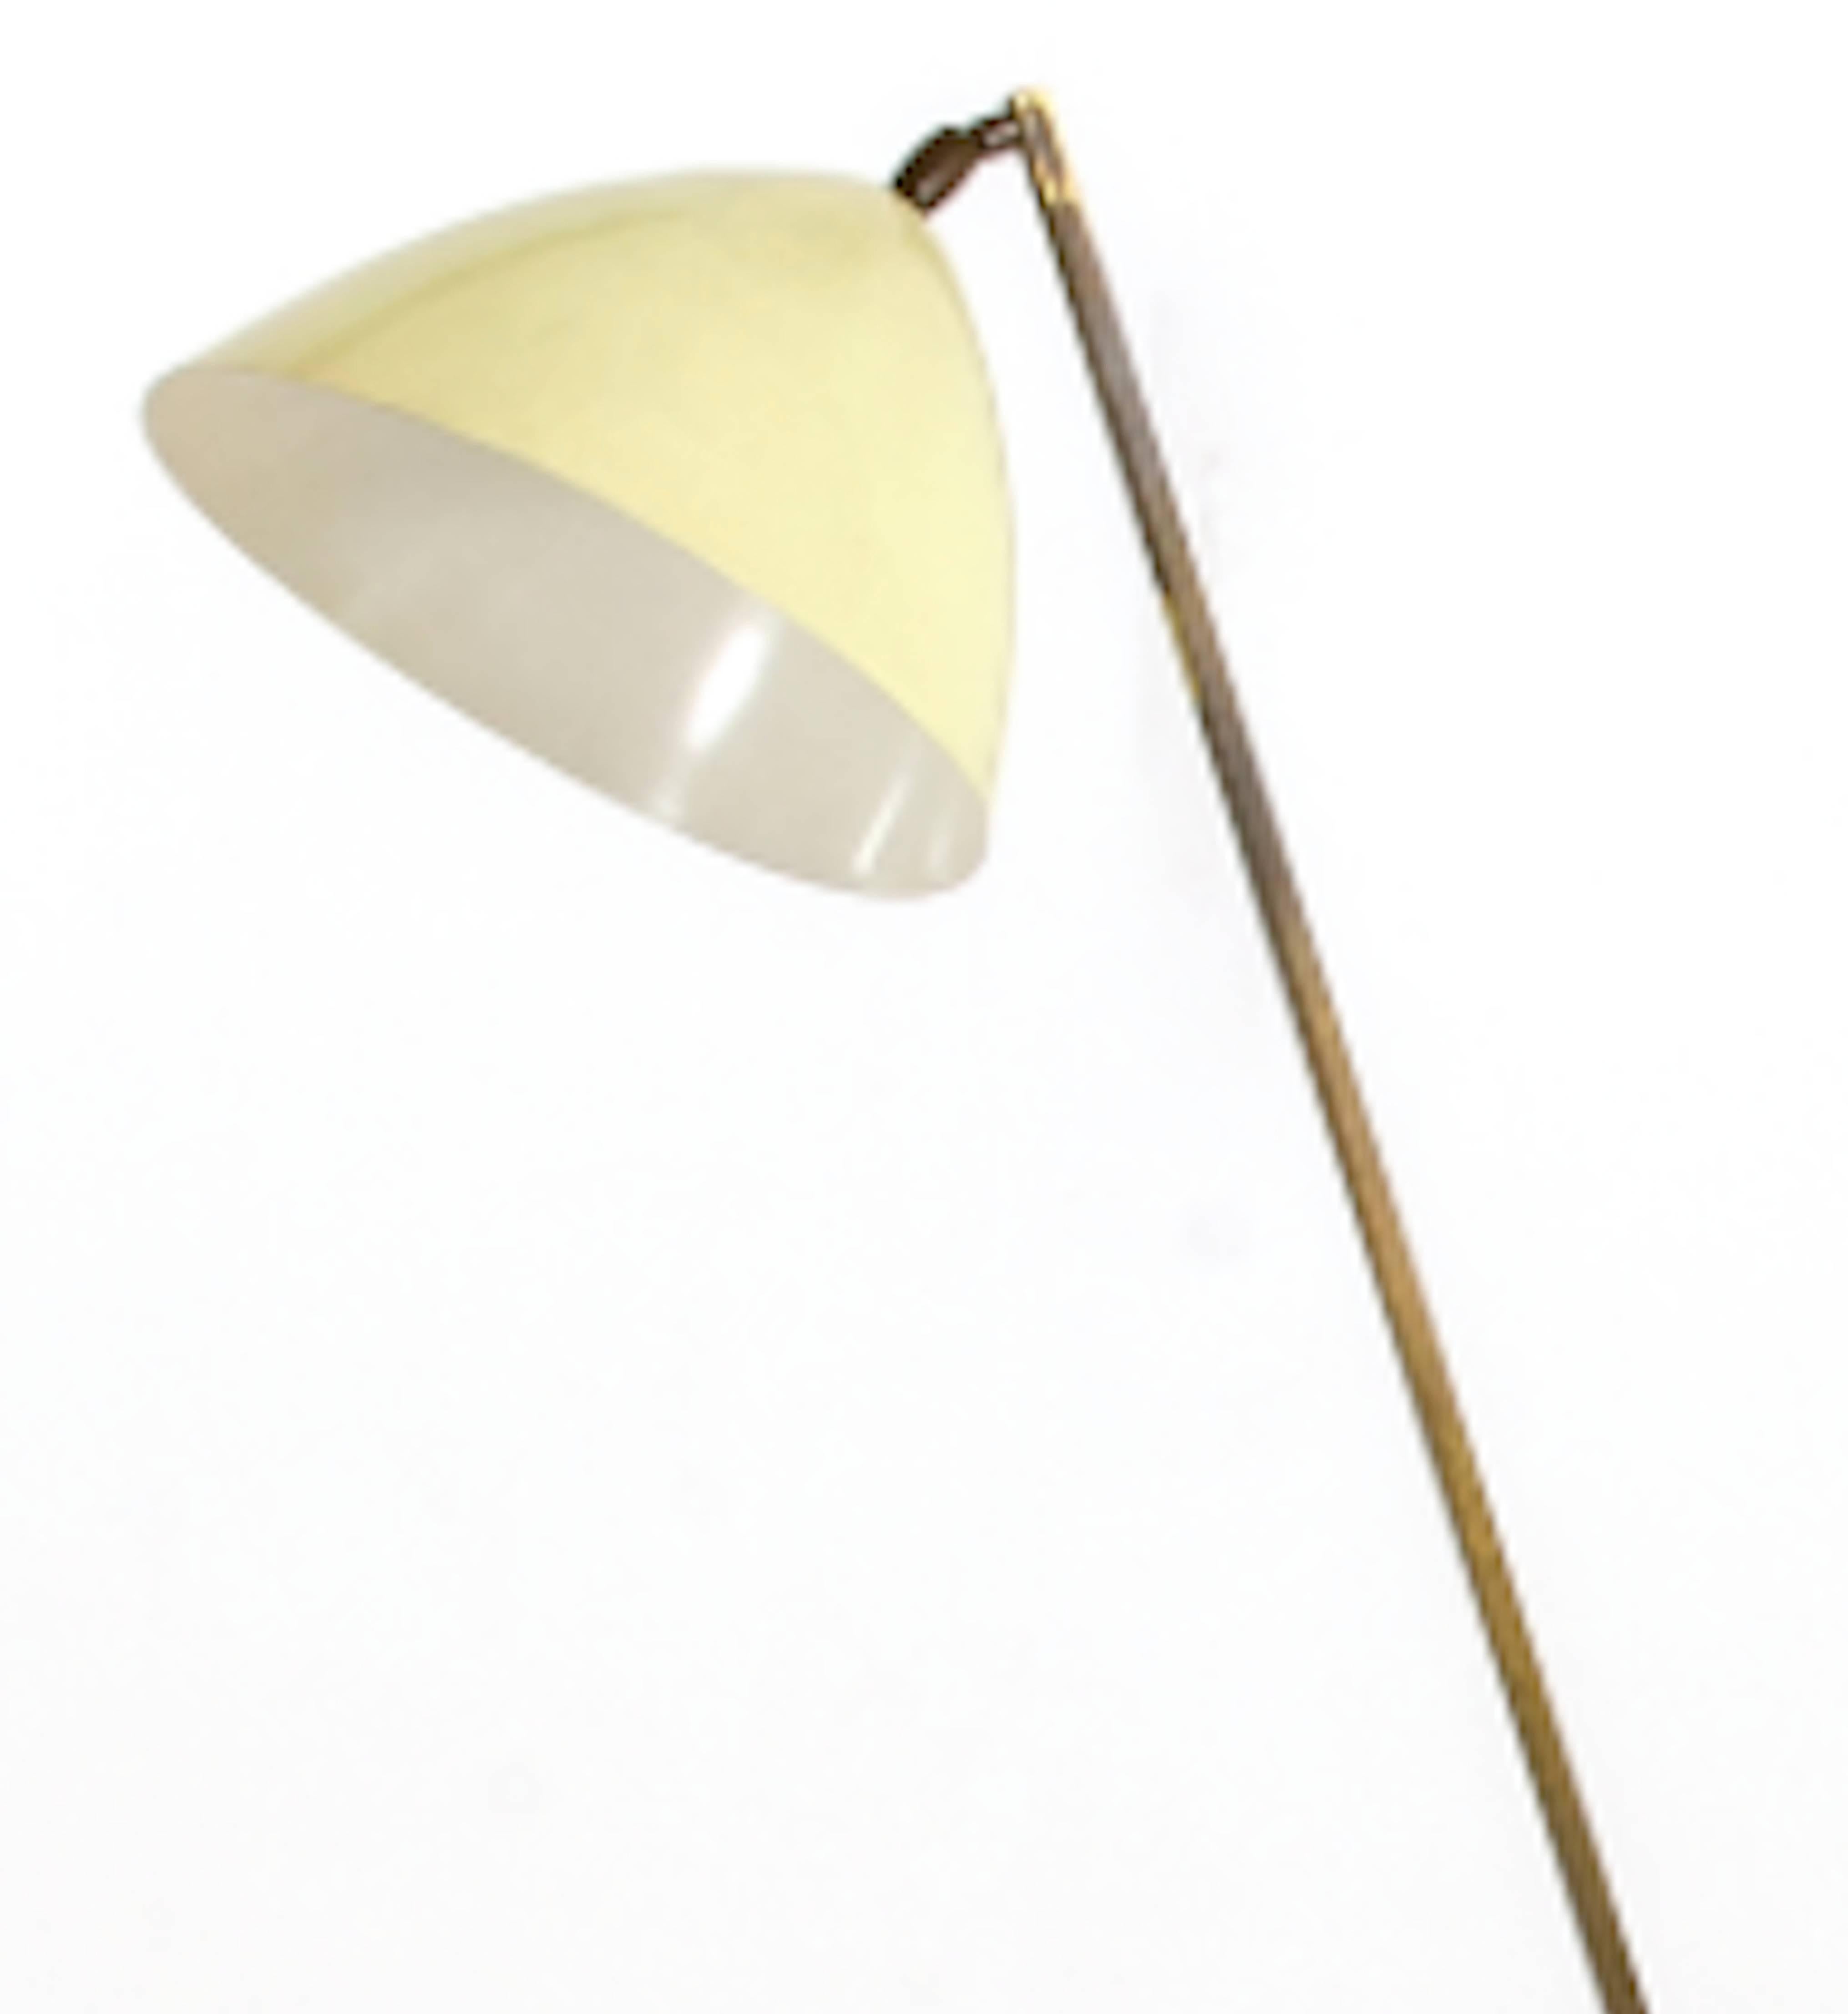 A Stilnovo metal floor lamp produce in 1950s, enameled metal shade, and brass frame and base. Excellent condition.